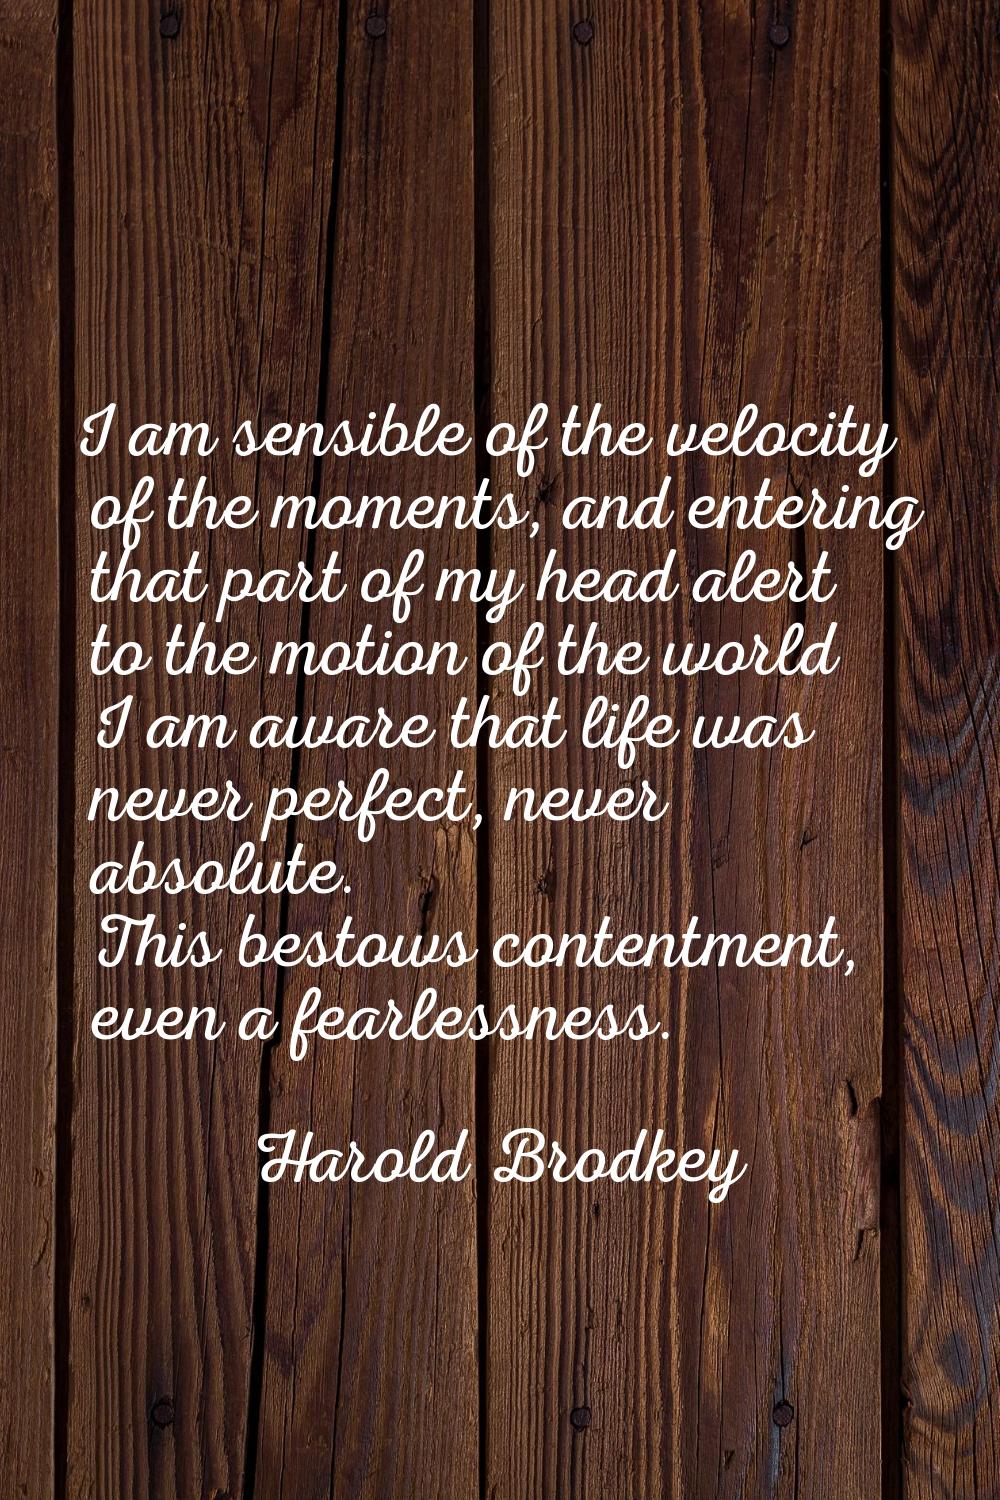 I am sensible of the velocity of the moments, and entering that part of my head alert to the motion